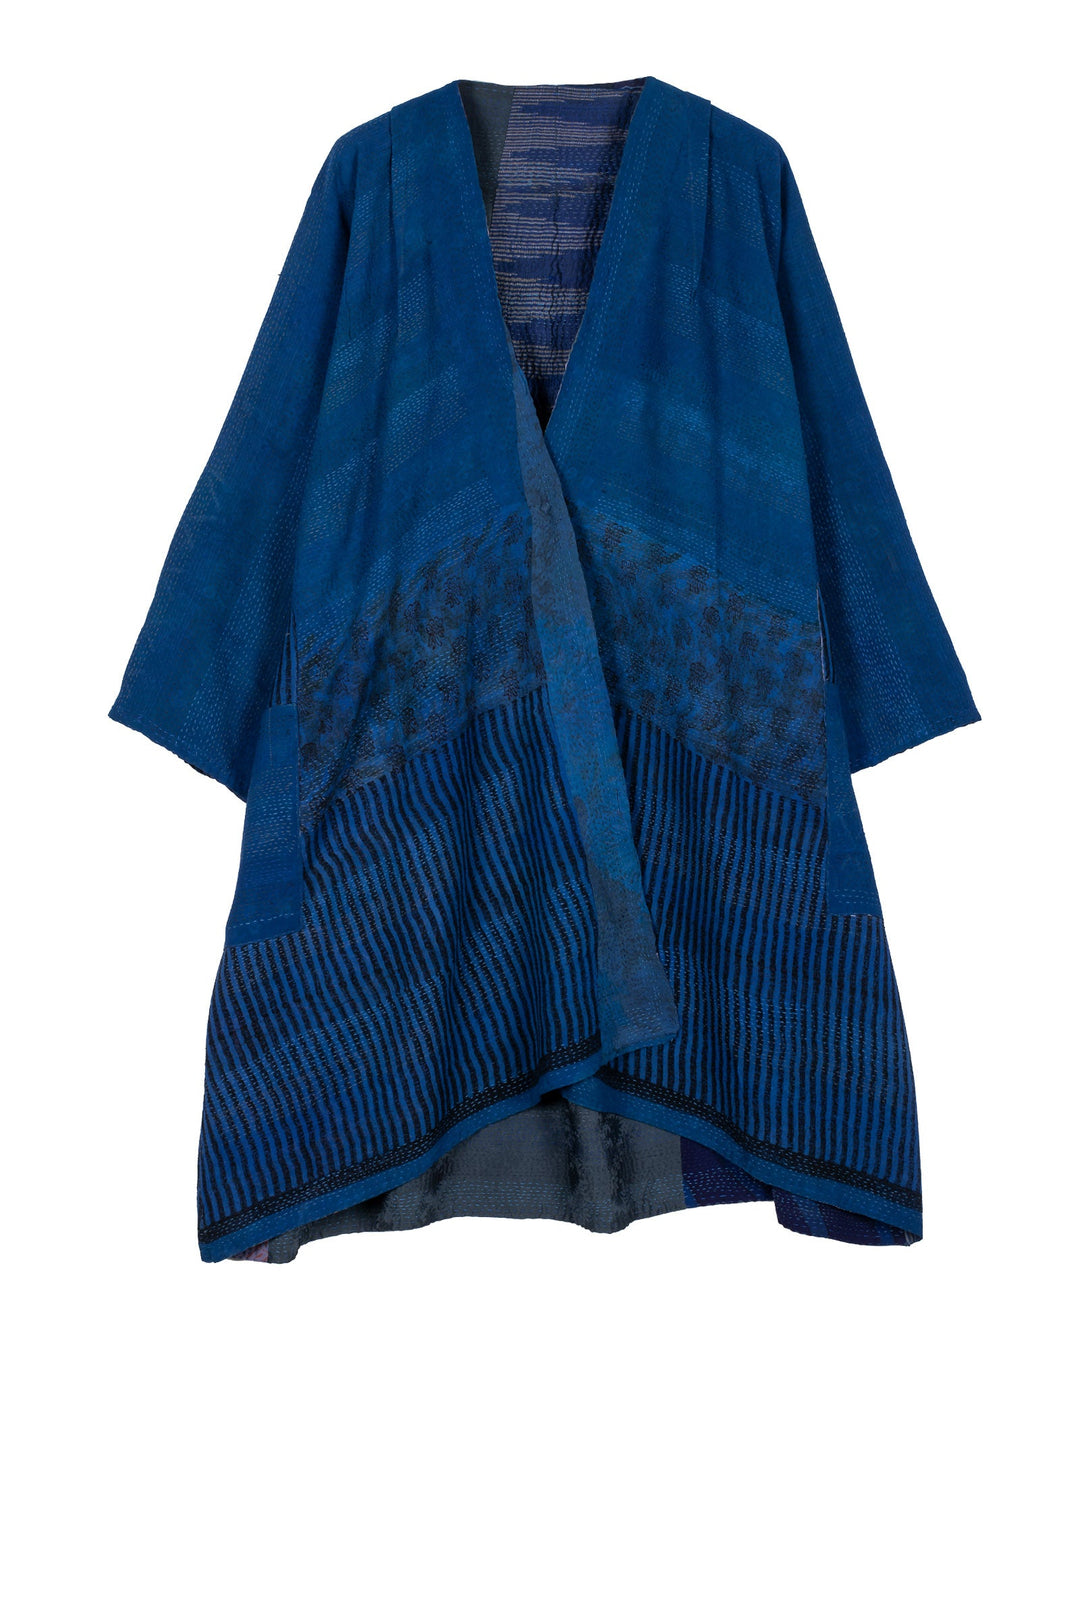 GEORGETTE VINTAGE SILK PATCH KANTHA KIMONO DUSTER - gs2317-nvy -